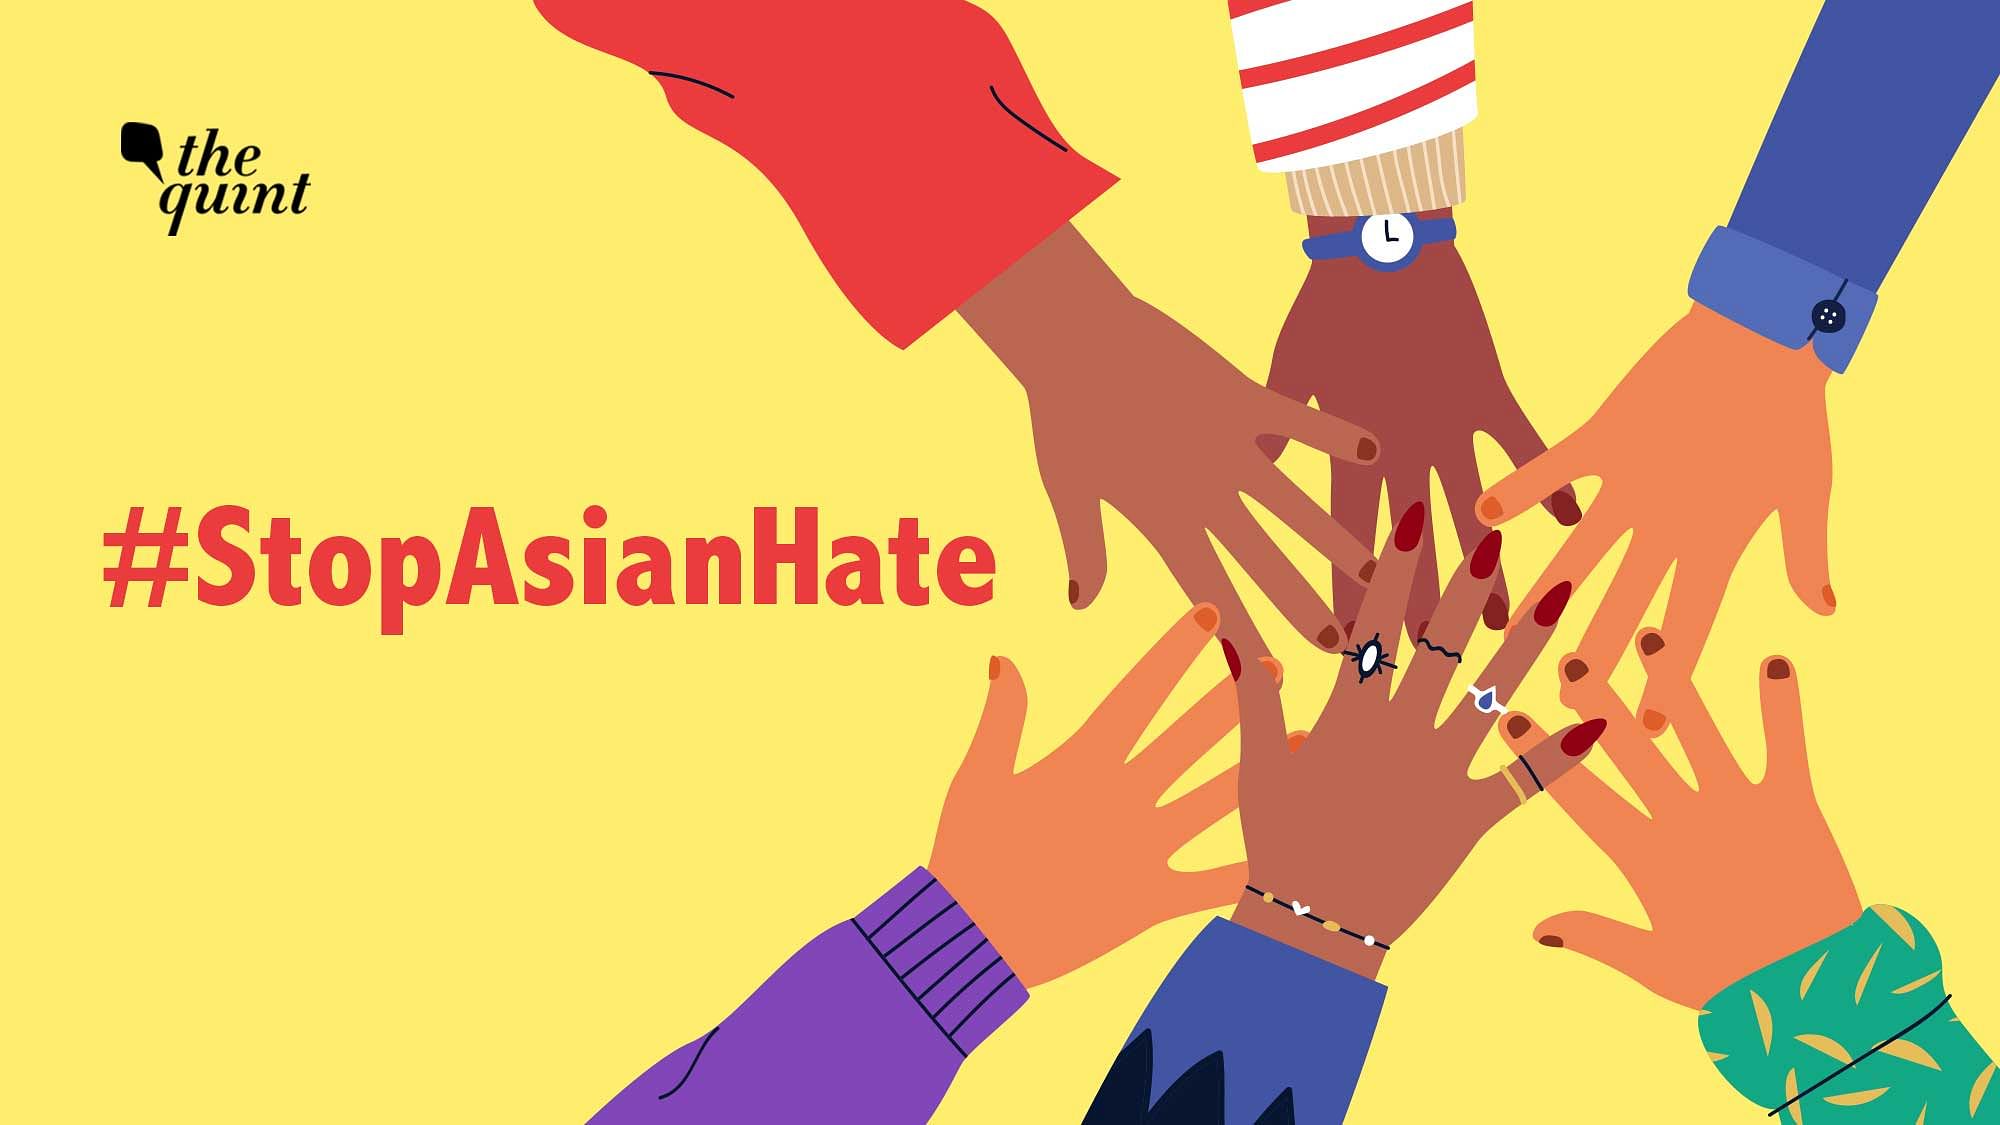 Anti-Asian hate crimes have been on the rise since the start of the pandemic.